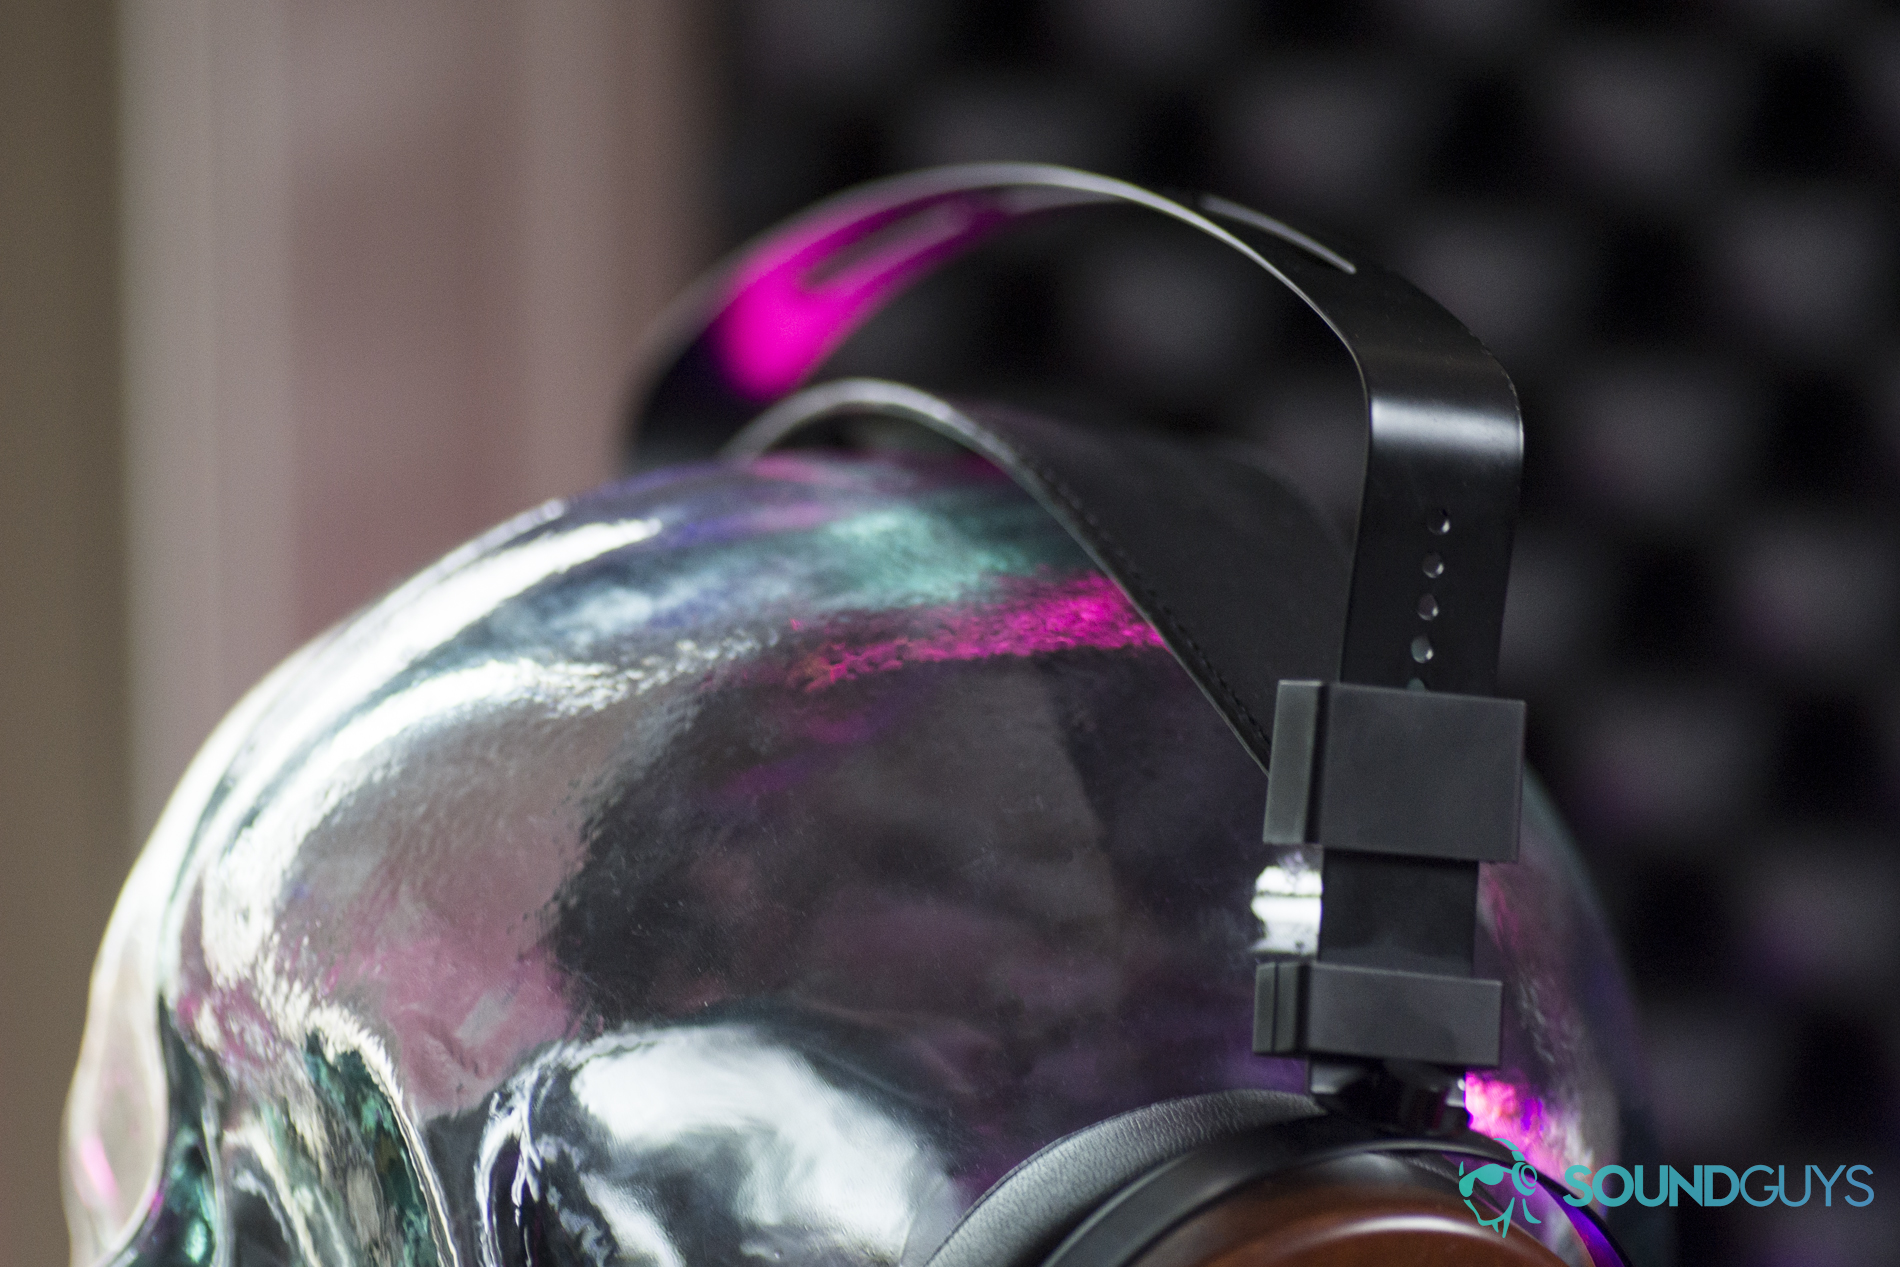 A photo of the Monoprice Monolith M565 on a glass head, showing off the band of the headphones.